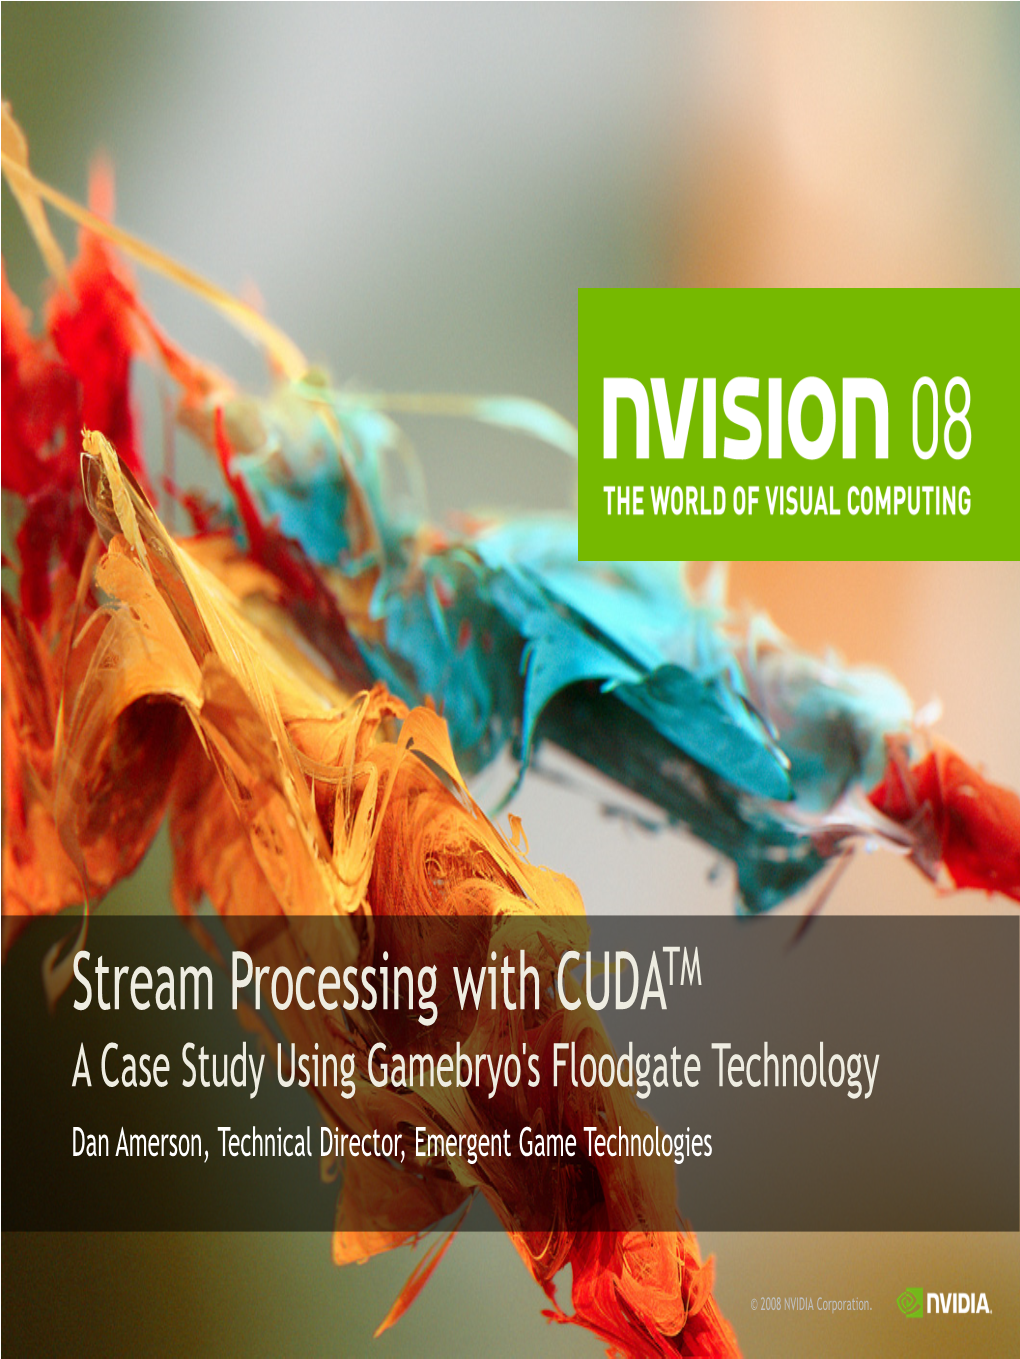 Stream Processing with CUDATM a Case Study Using Gamebryo's Floodgate Technology Dan Amerson, Technical Director, Emergent Game Technologies